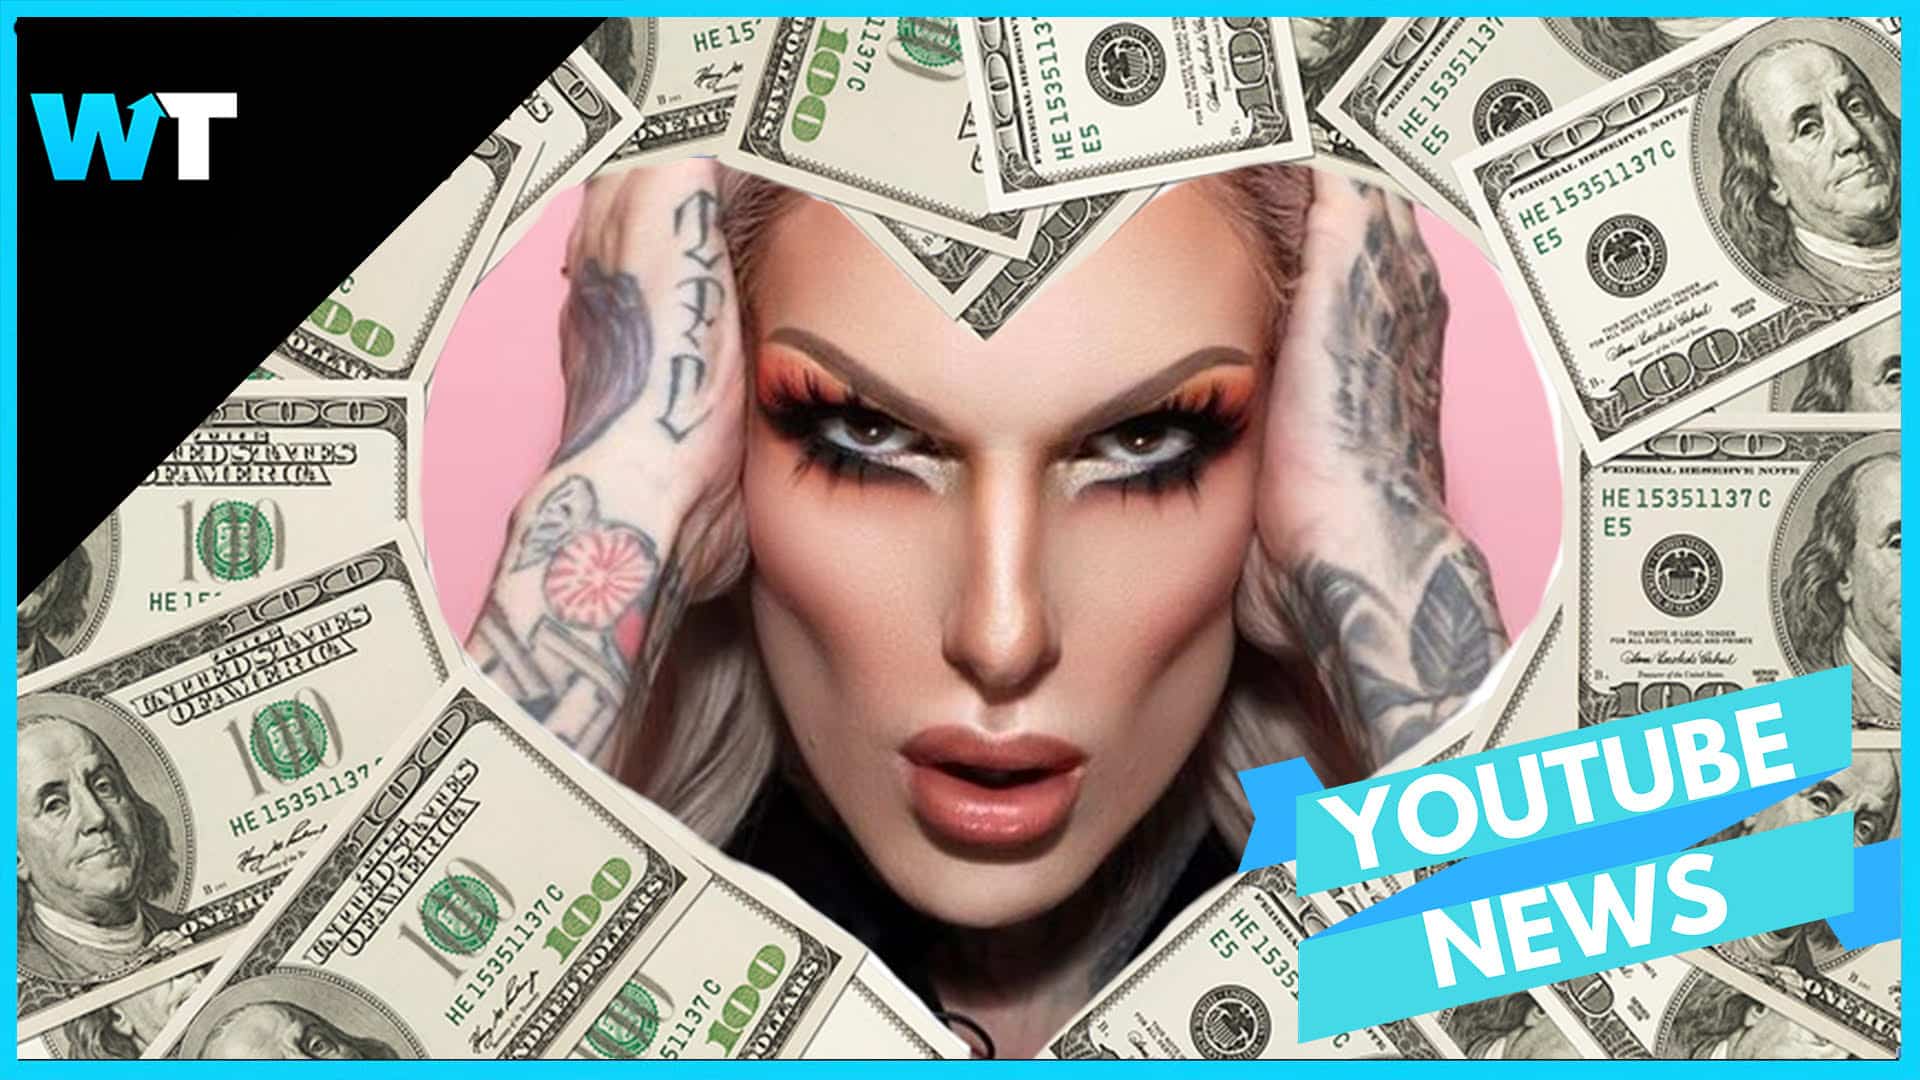 Jeffree Star Is Going GREEN (If You Know What We Mean) | What's Trending1920 x 1080